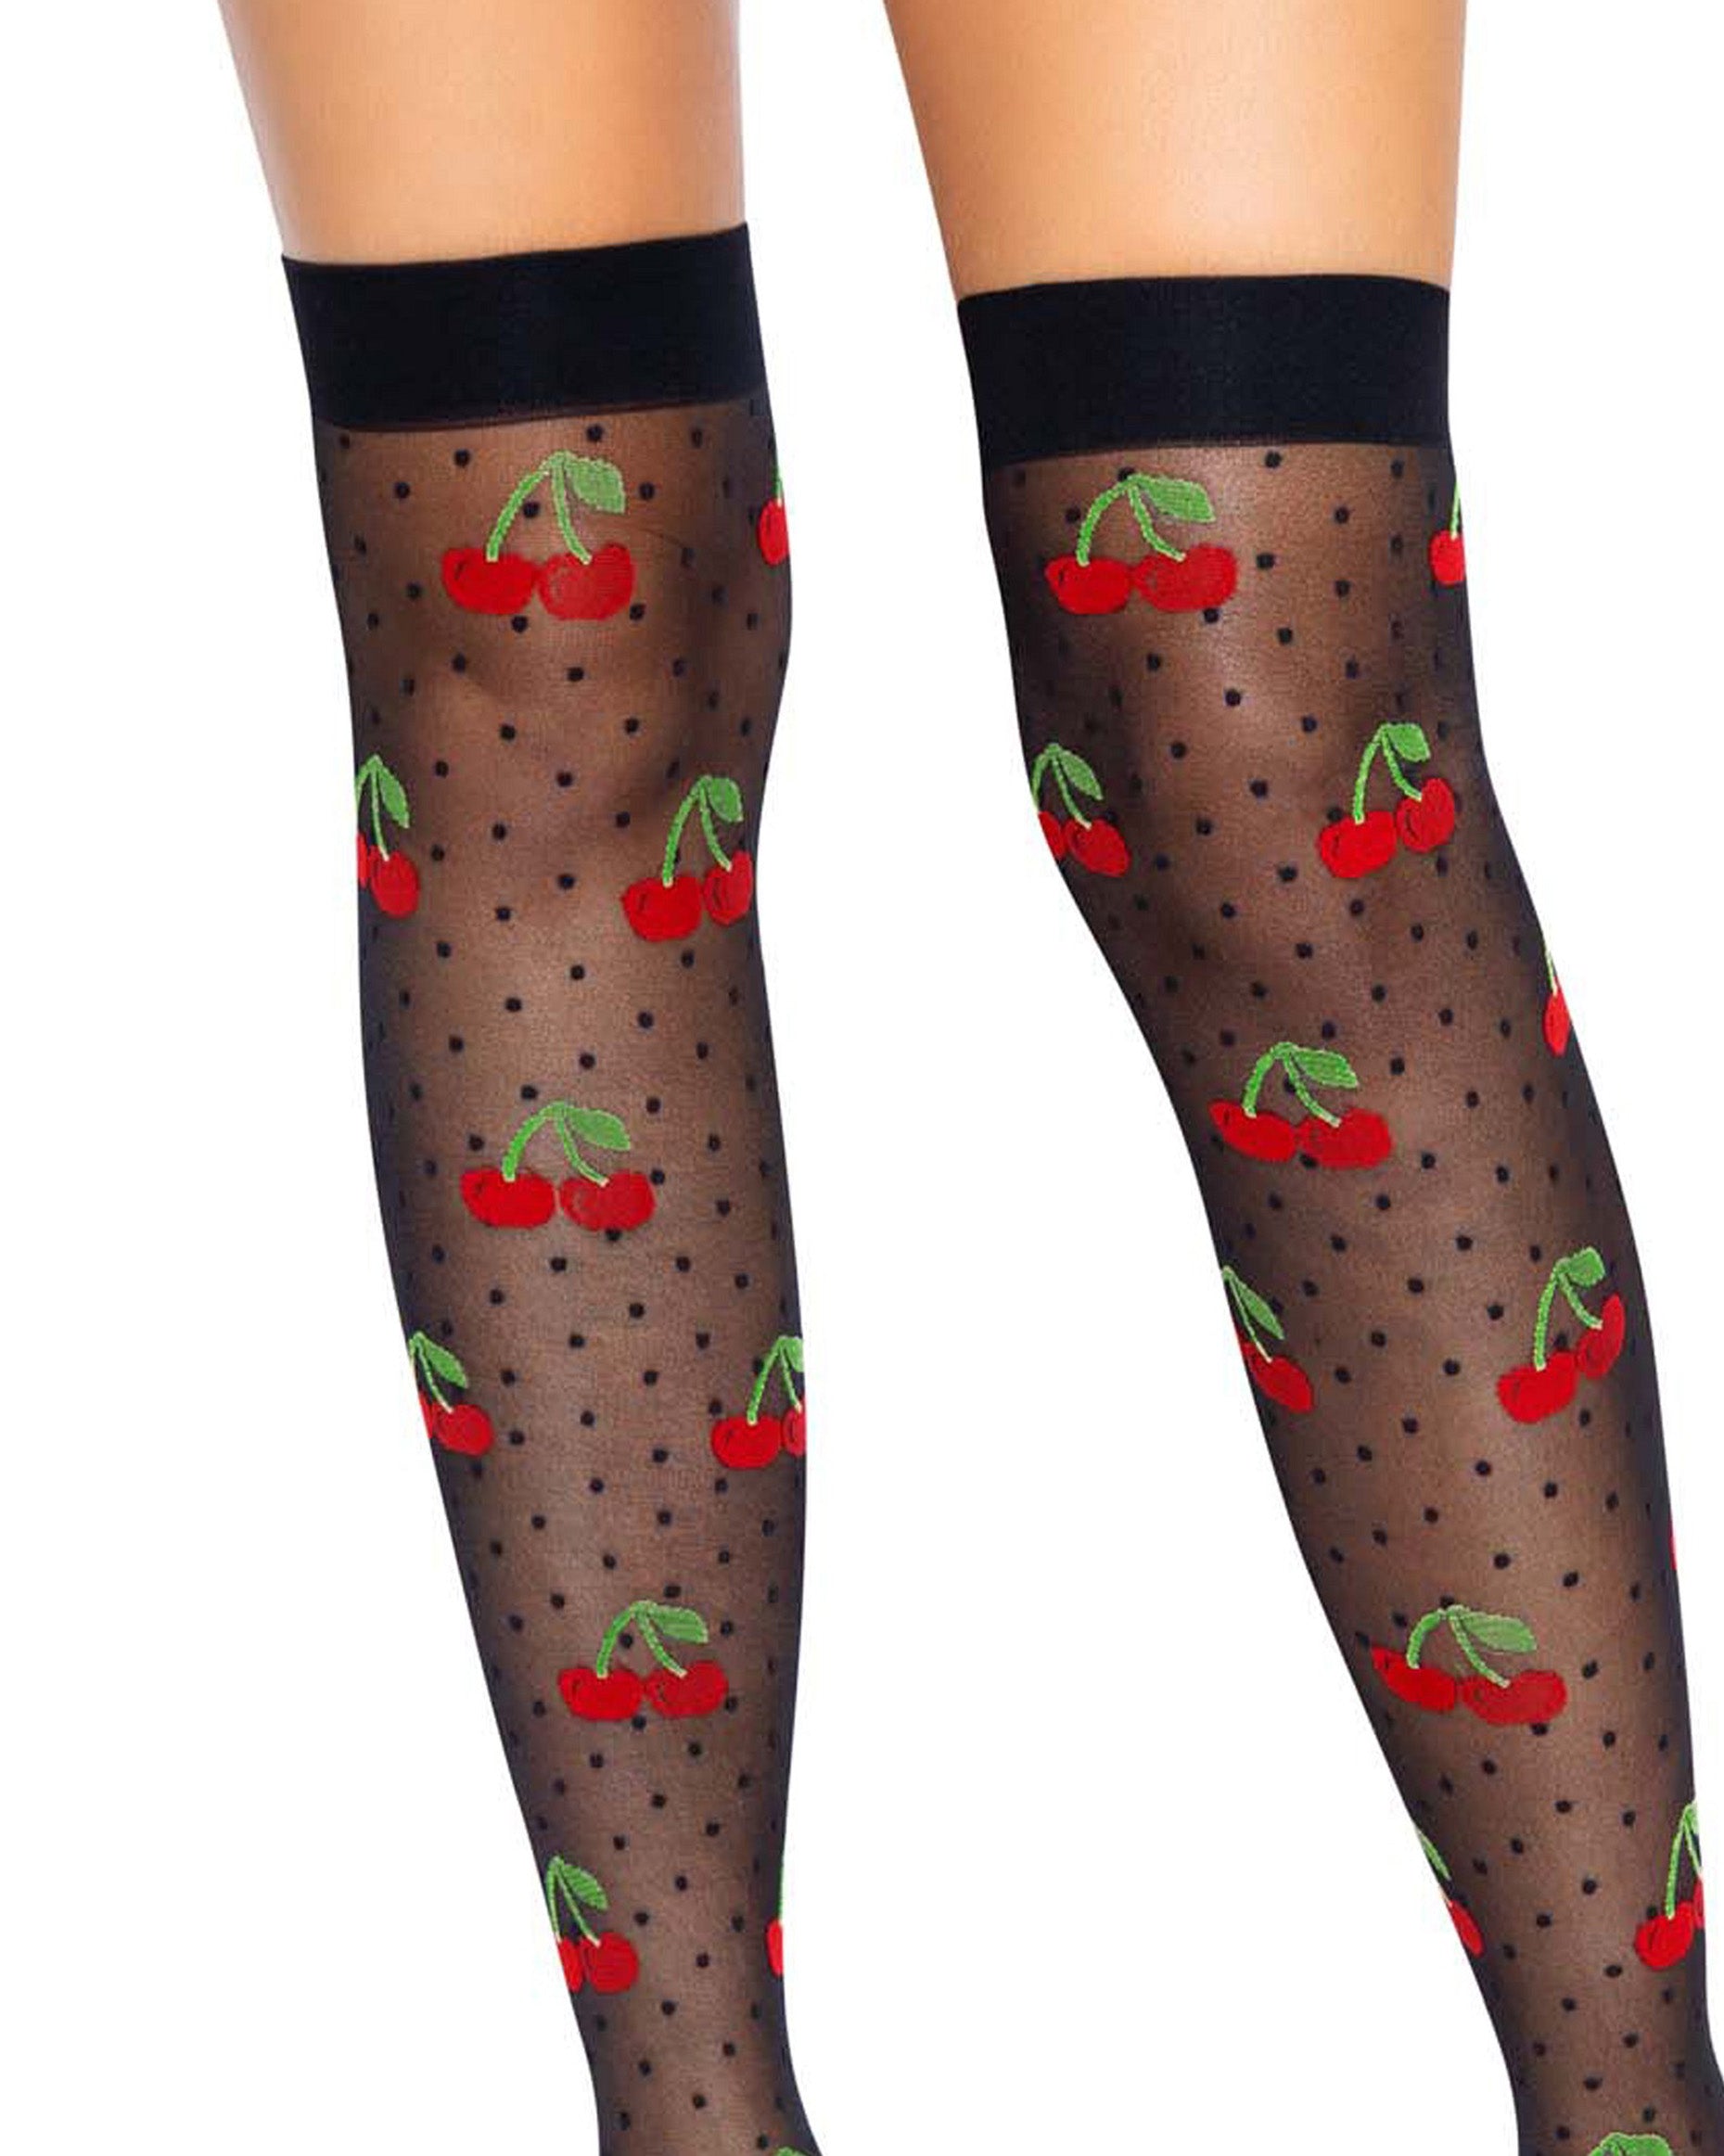 Leg Avenue 6638 Cherry Polka Dot Thigh Highs - Sheer black thigh high socks / stockings with a small spot and red cherries with green leaves and stems pattern and plain elasticated cuff.